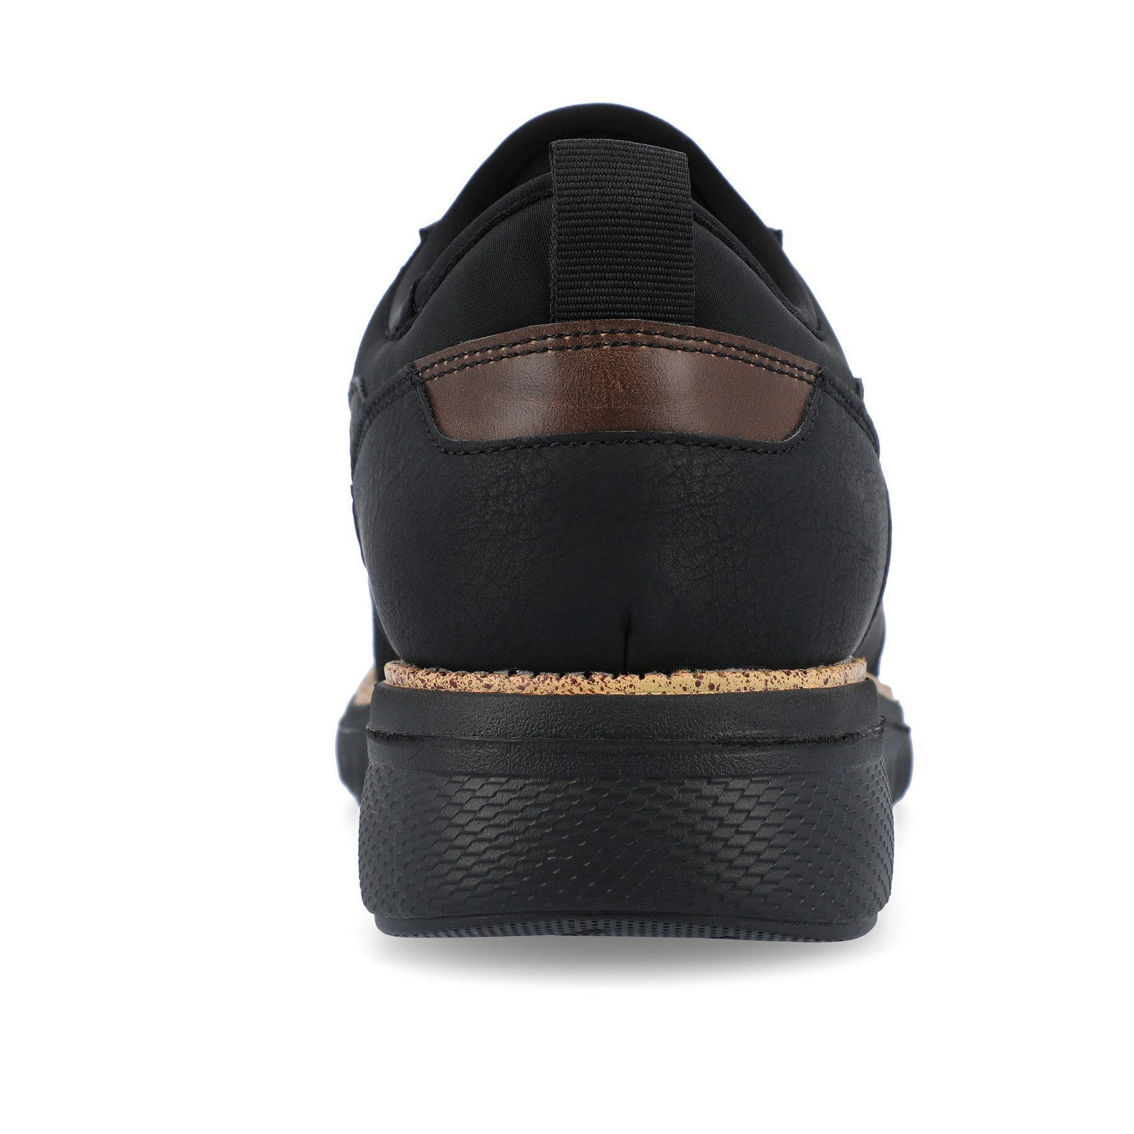 Vance Co. Claxton Knit Sneaker - Image 3 of 5